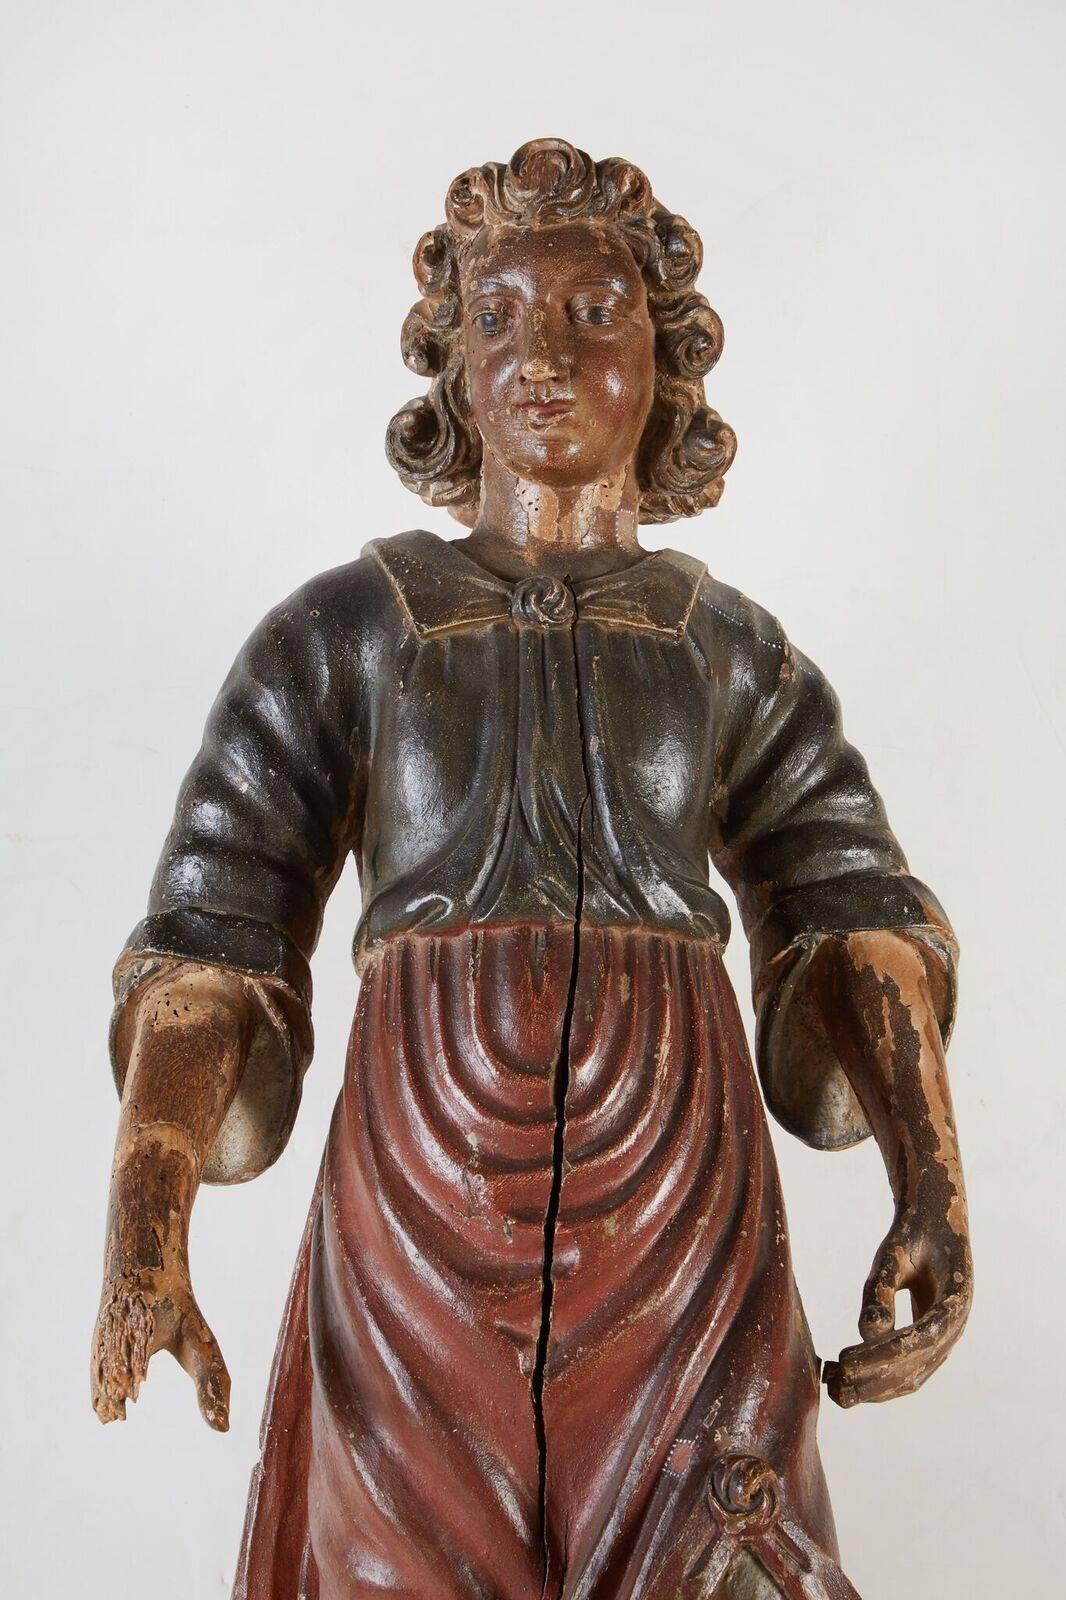 Hand-carved and painted, polychrome, Roman Santos figure in mid-stride. The figure wears stylized, flowing robes and stands atop a period base.